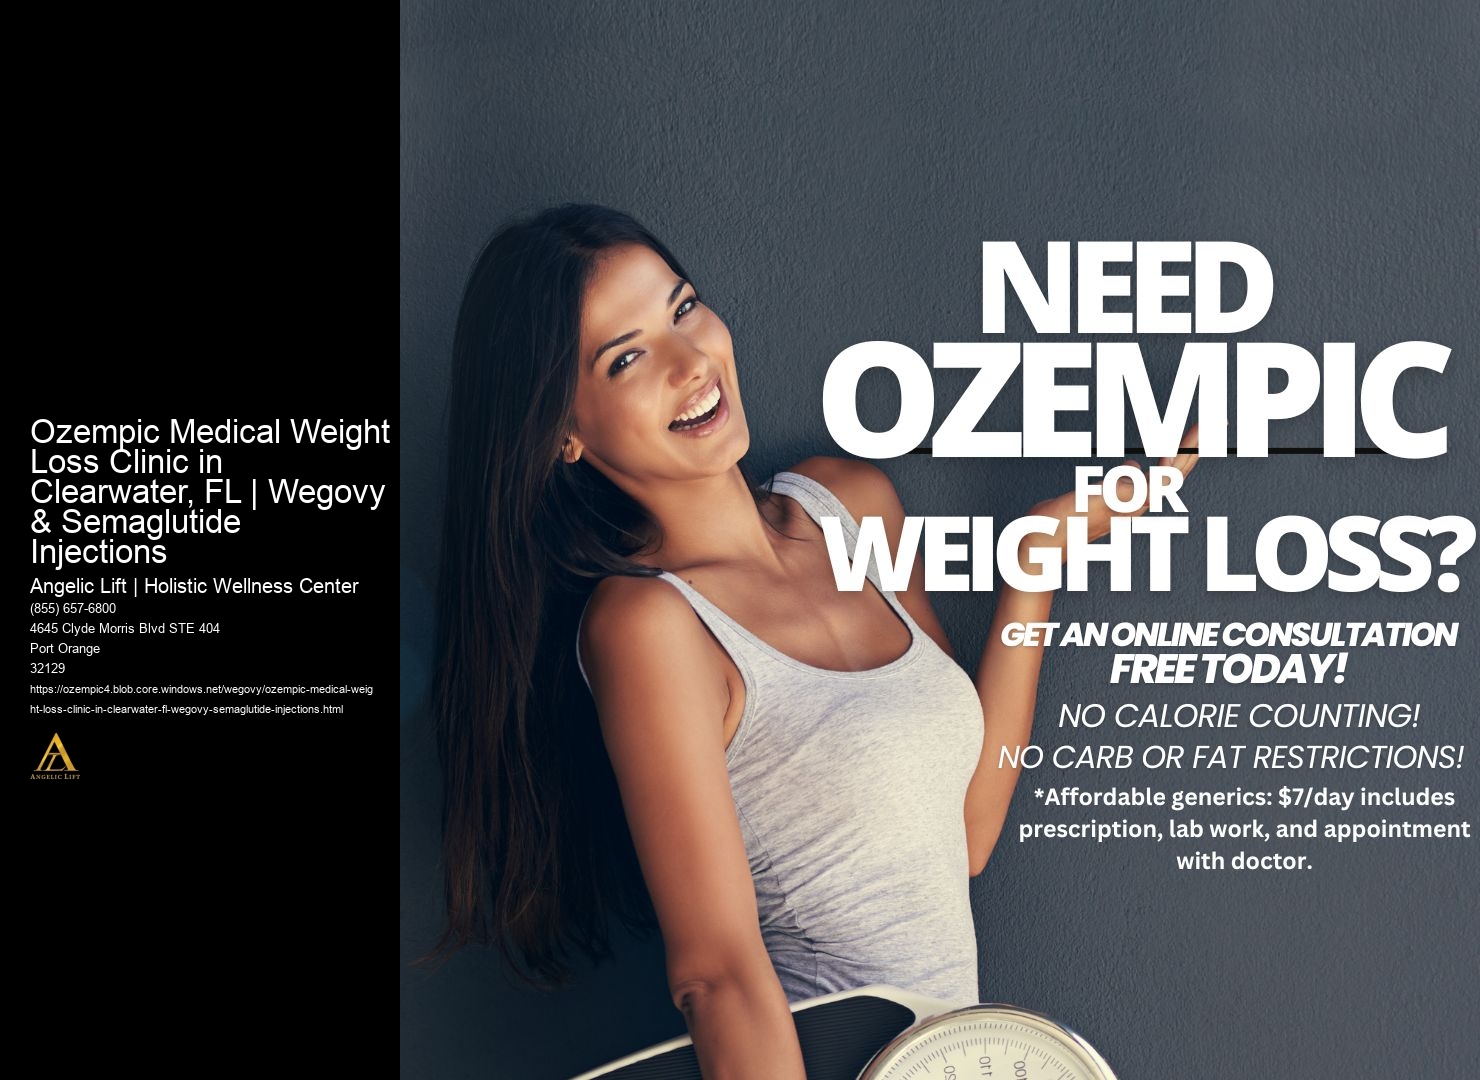 Ozempic Medical Weight Loss Clinic in Clearwater, FL | Wegovy & Semaglutide Injections